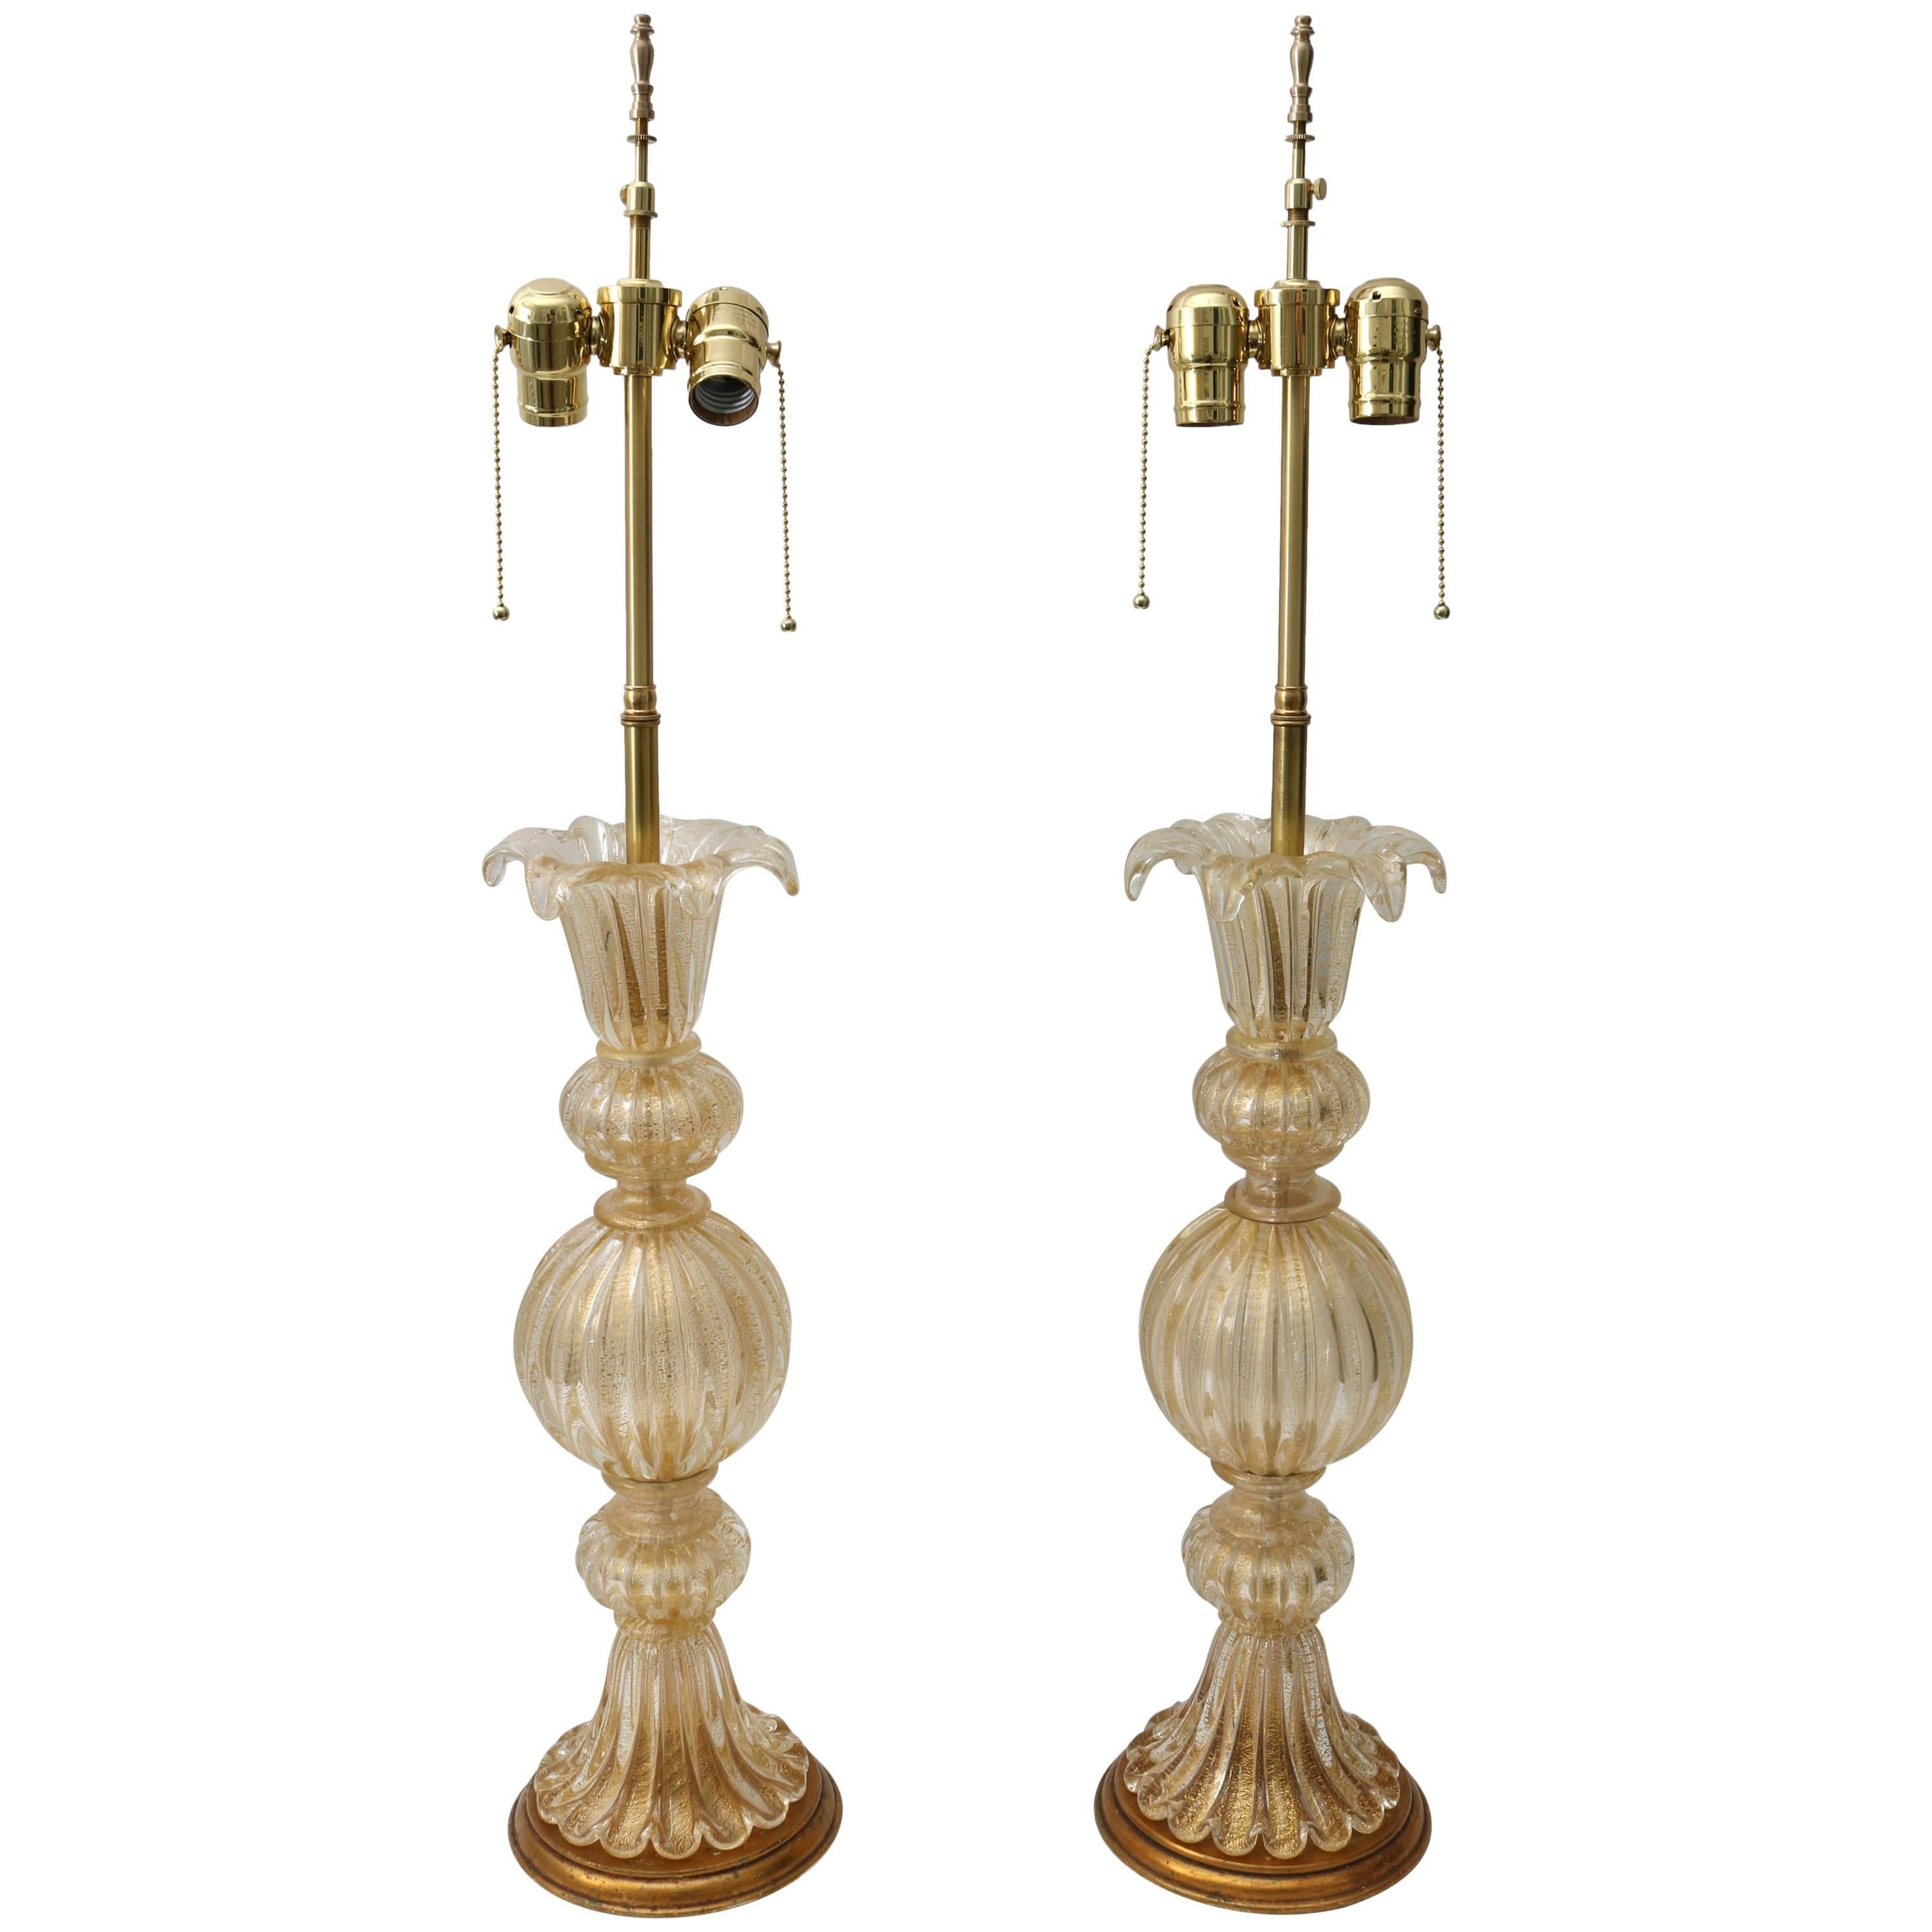 Pair of Barovier Et Toso Murano Glass Lamps in Clear Gold Coloration